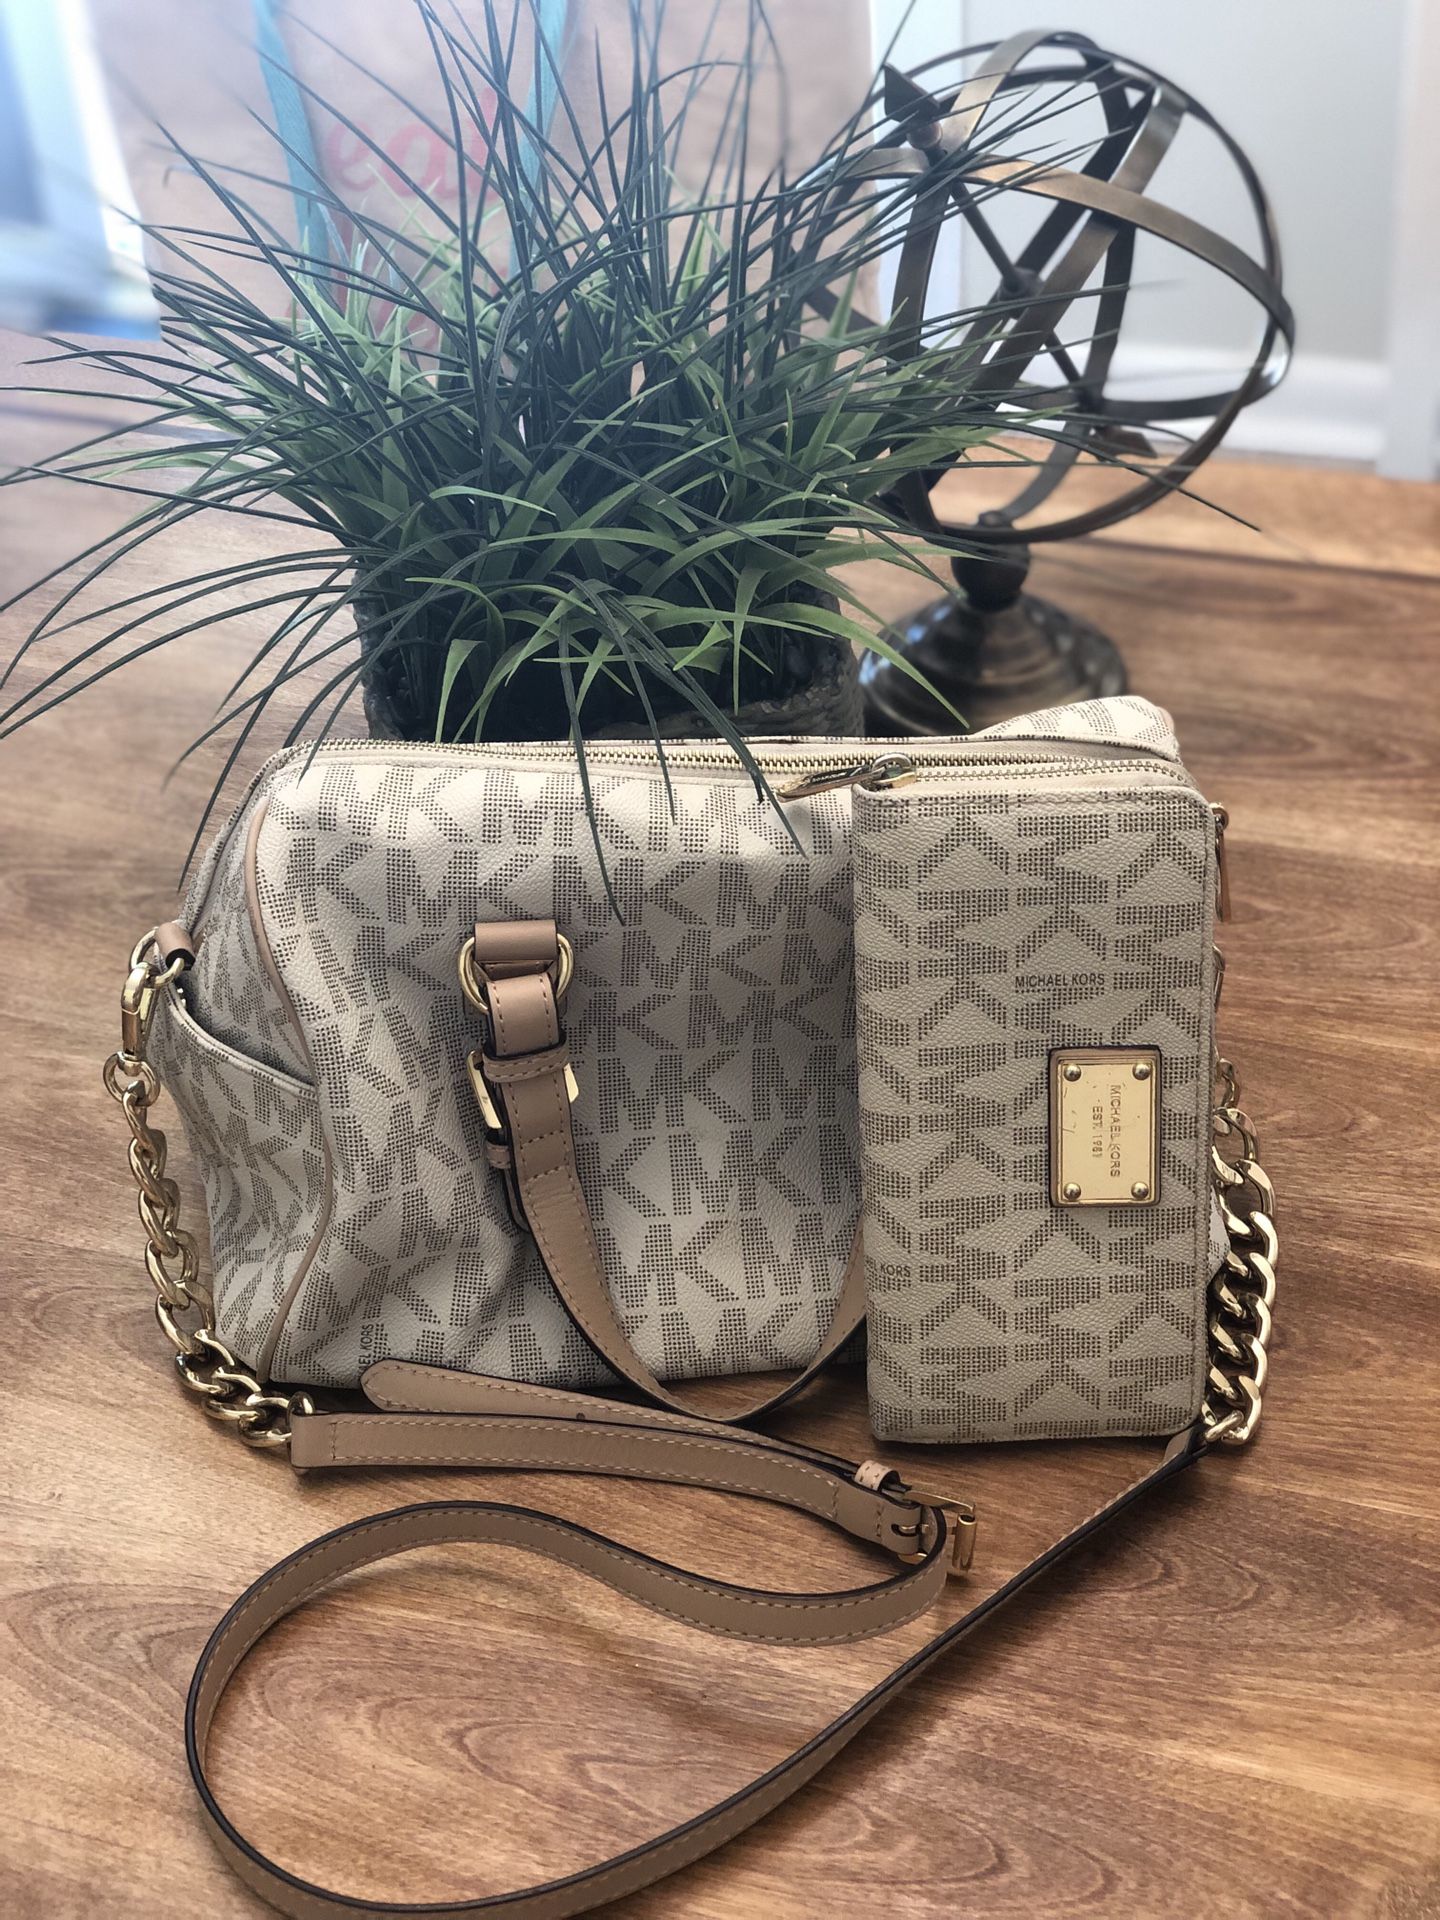 Medium, MK purse and wallet - Authentic